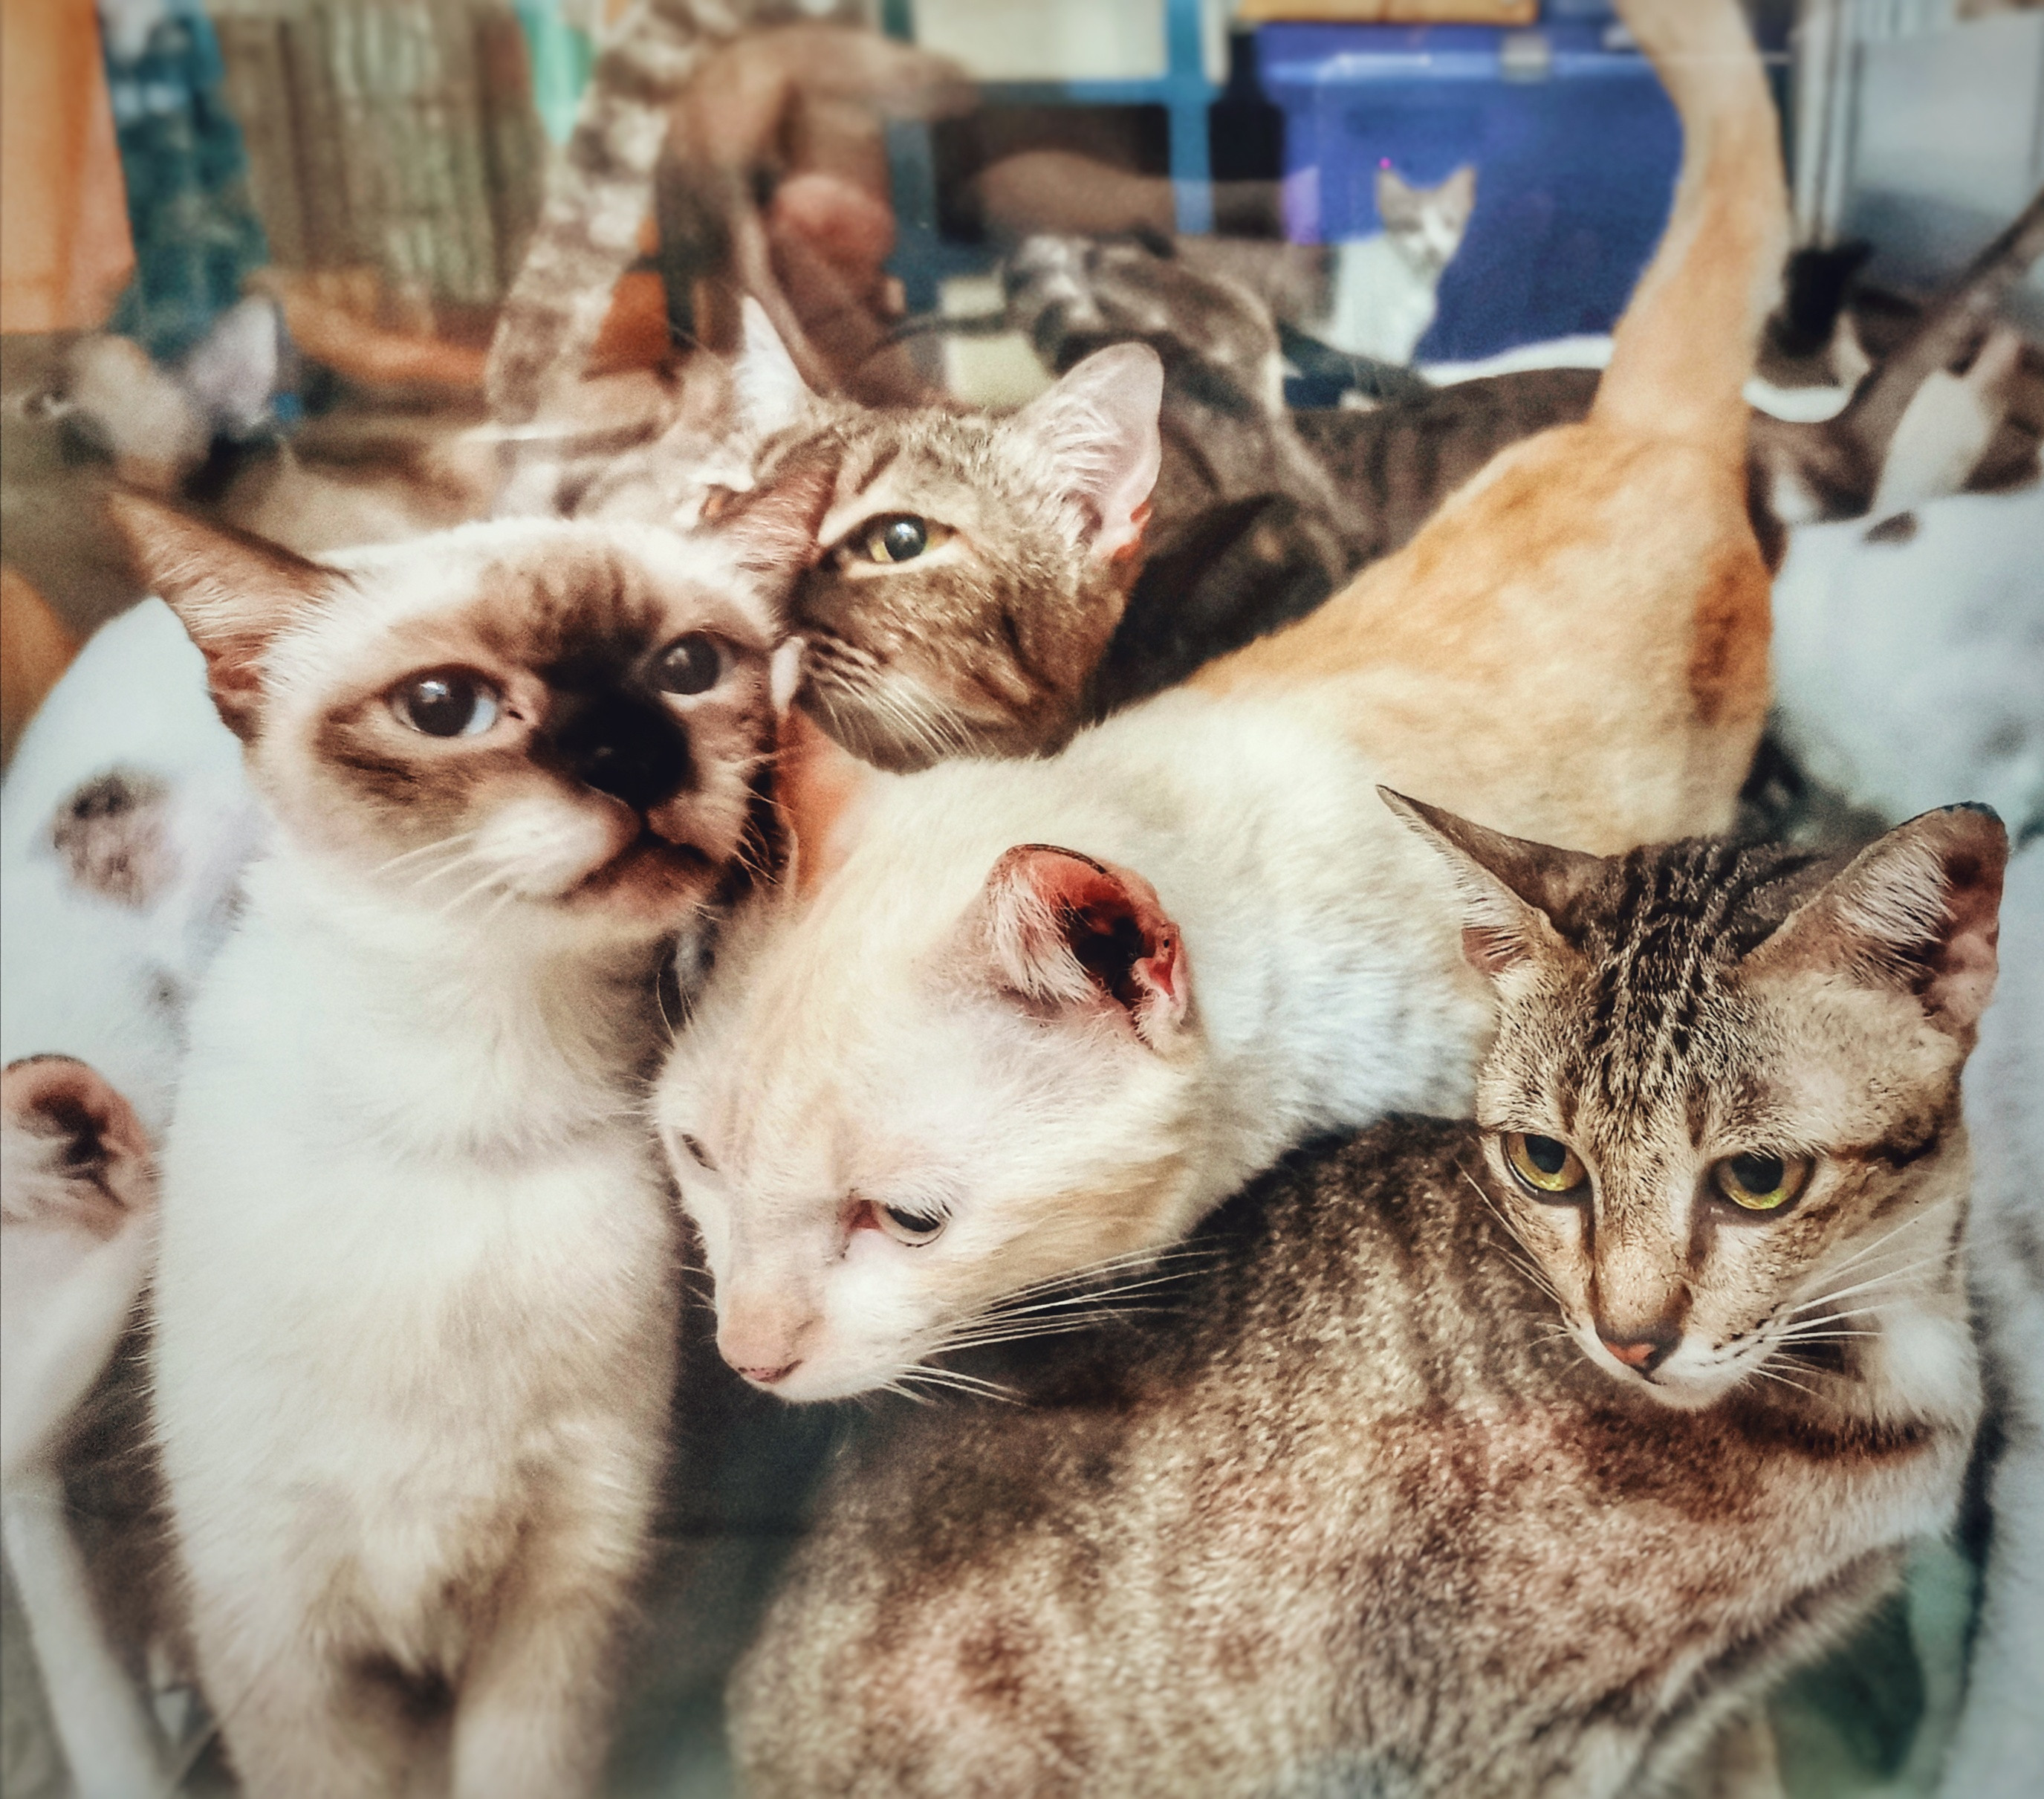 A man in South Korea was sentenced to 14 months’ jail time for killing 76 cats. Photo: Shutterstock